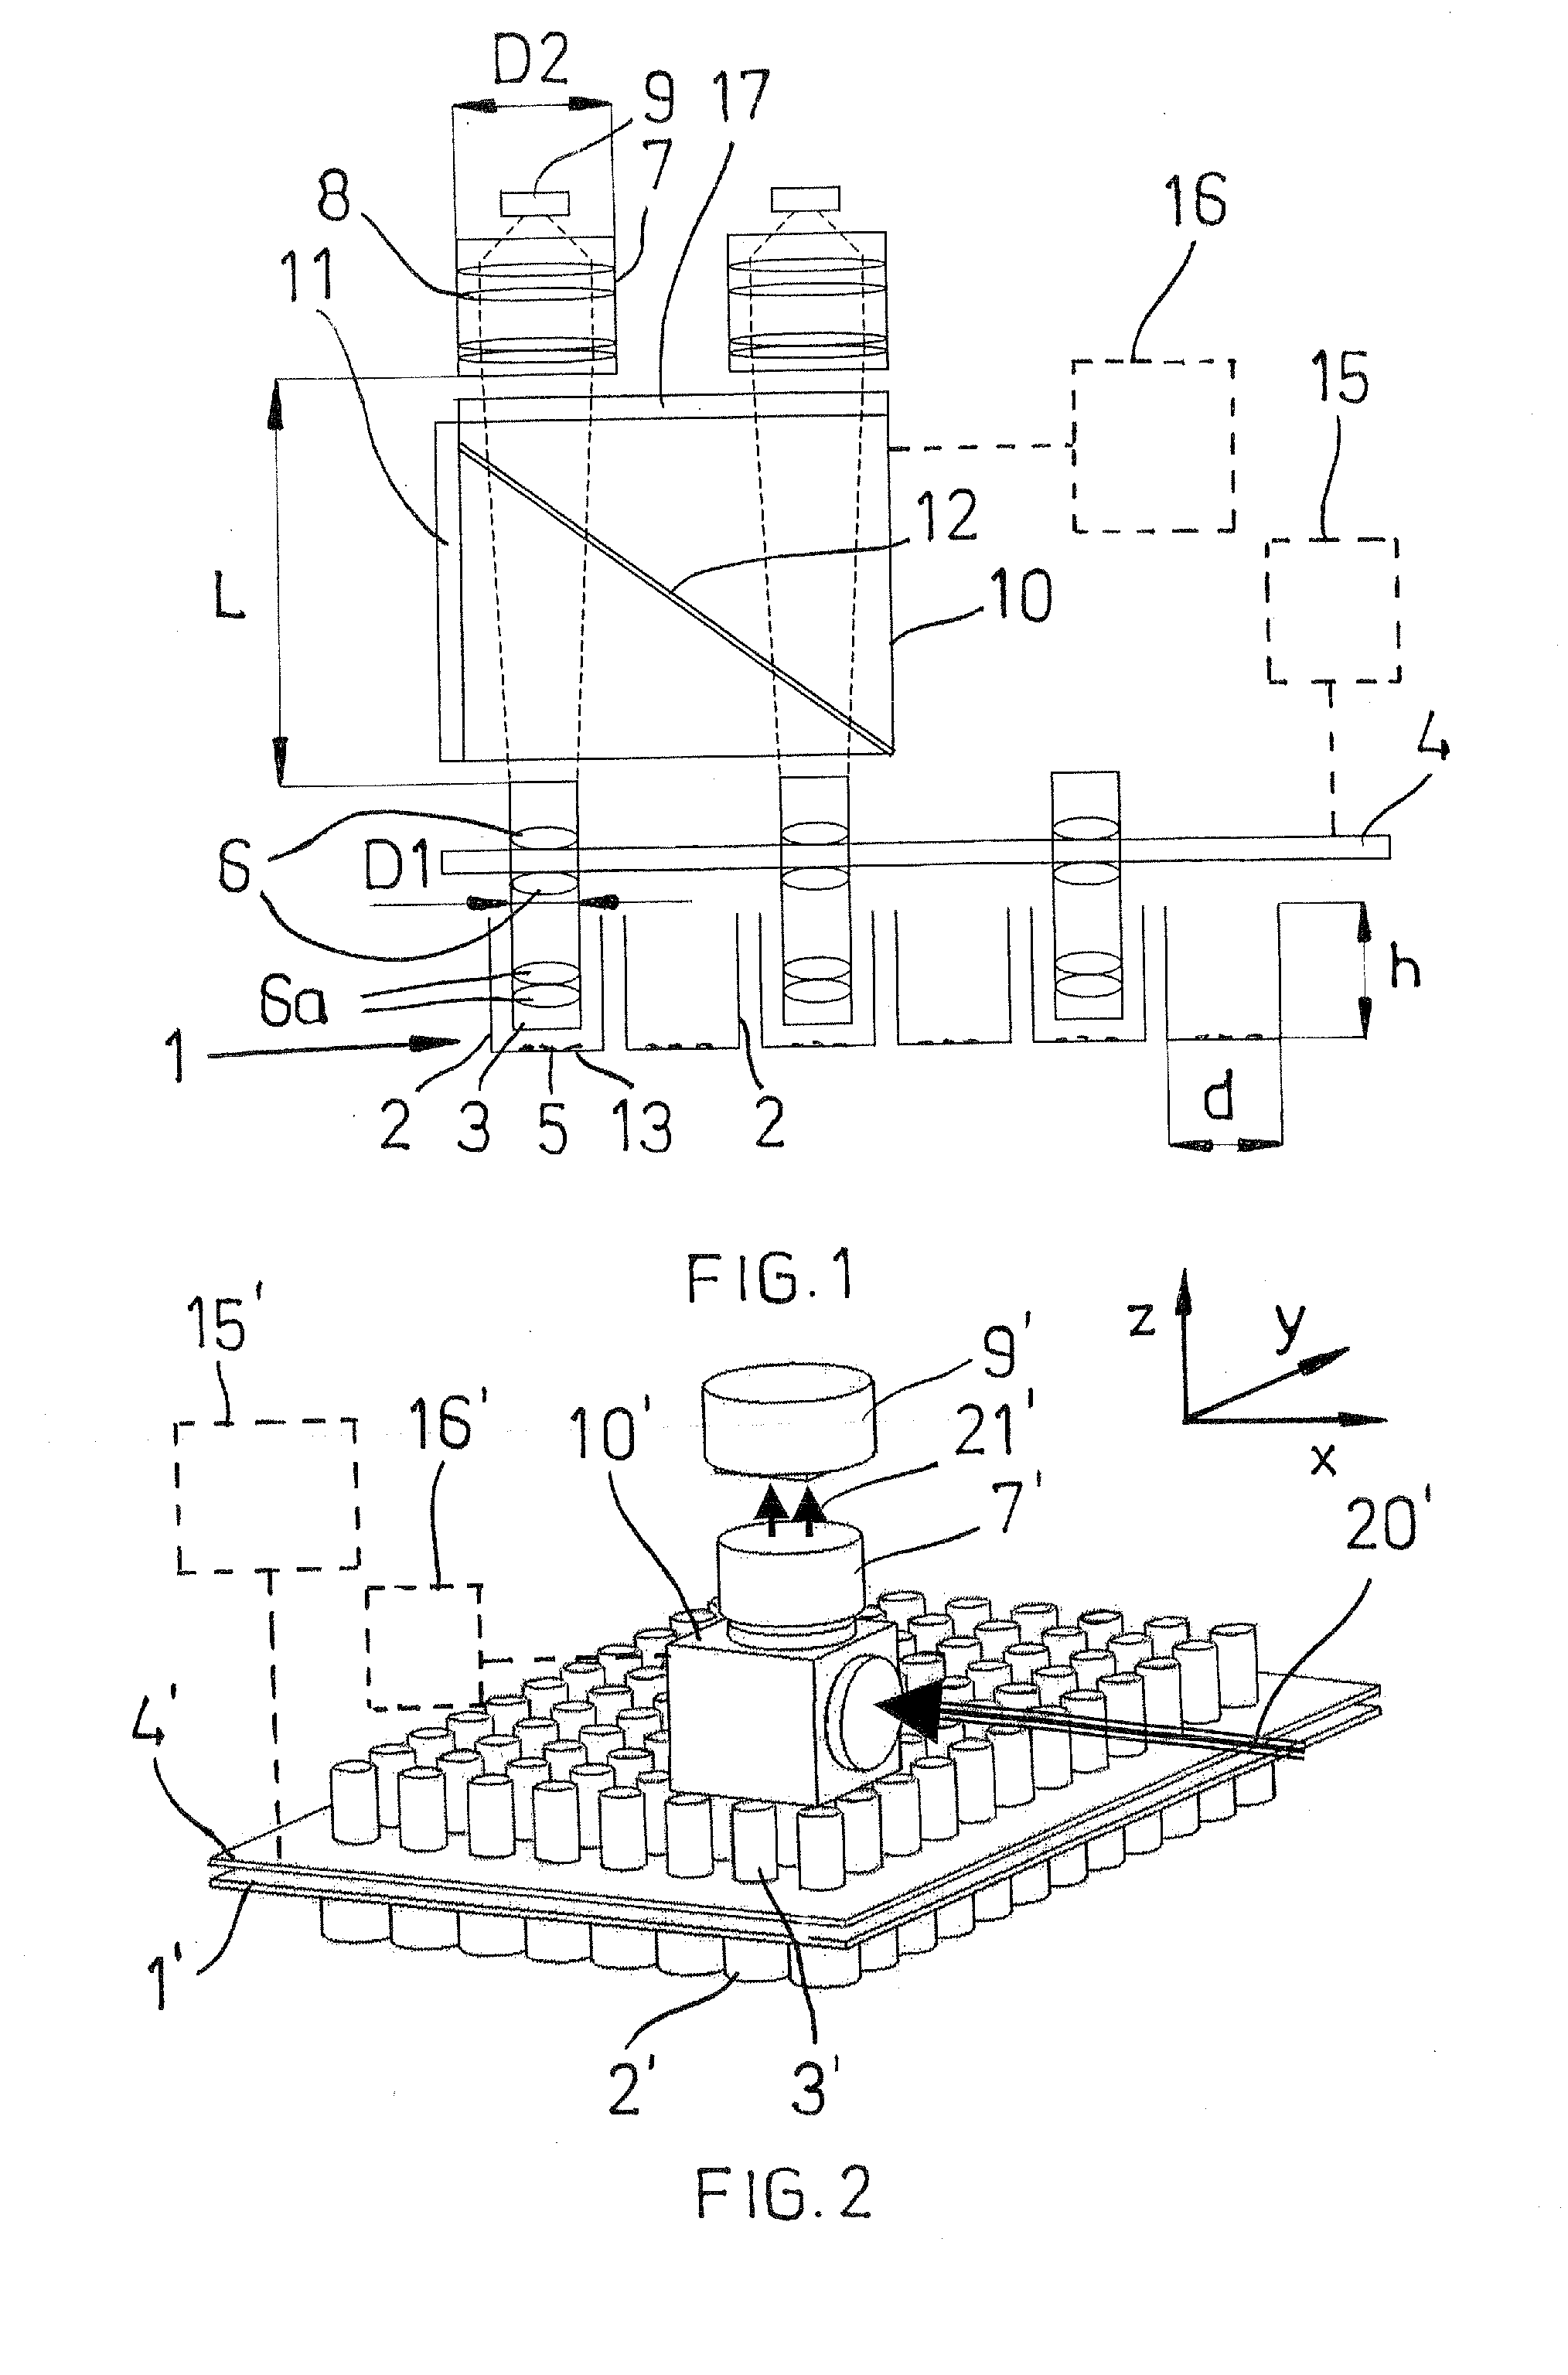 Arrangement in an Imaging System for Microtitre Wells